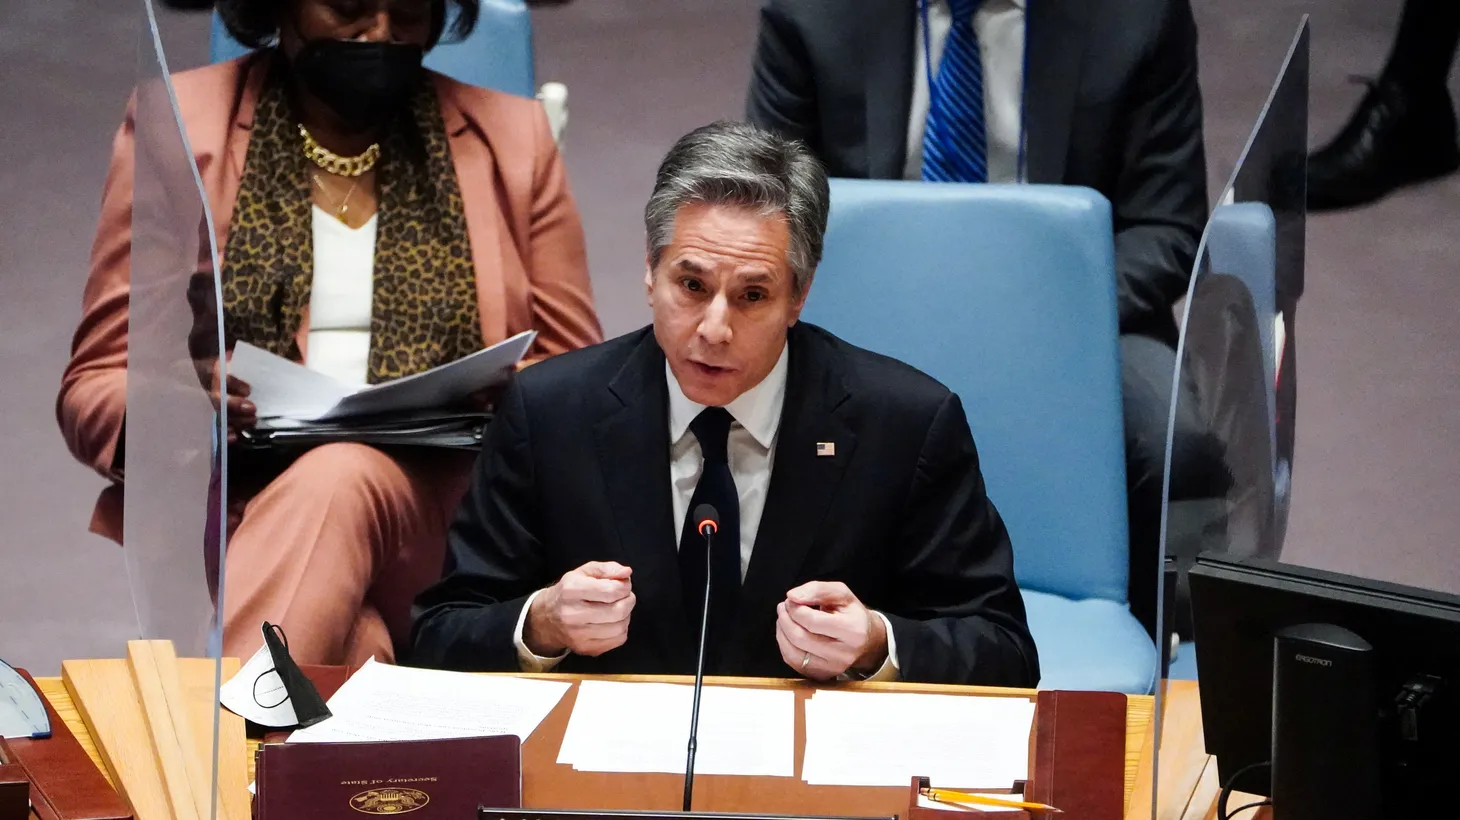 U.S. Secretary of State Antony Blinken speaks during a meeting of the U.N. Security Council on the situation between Russia and Ukraine, at the United Nations Headquarters in Manhattan, New York City, U.S., on February 17, 2022.